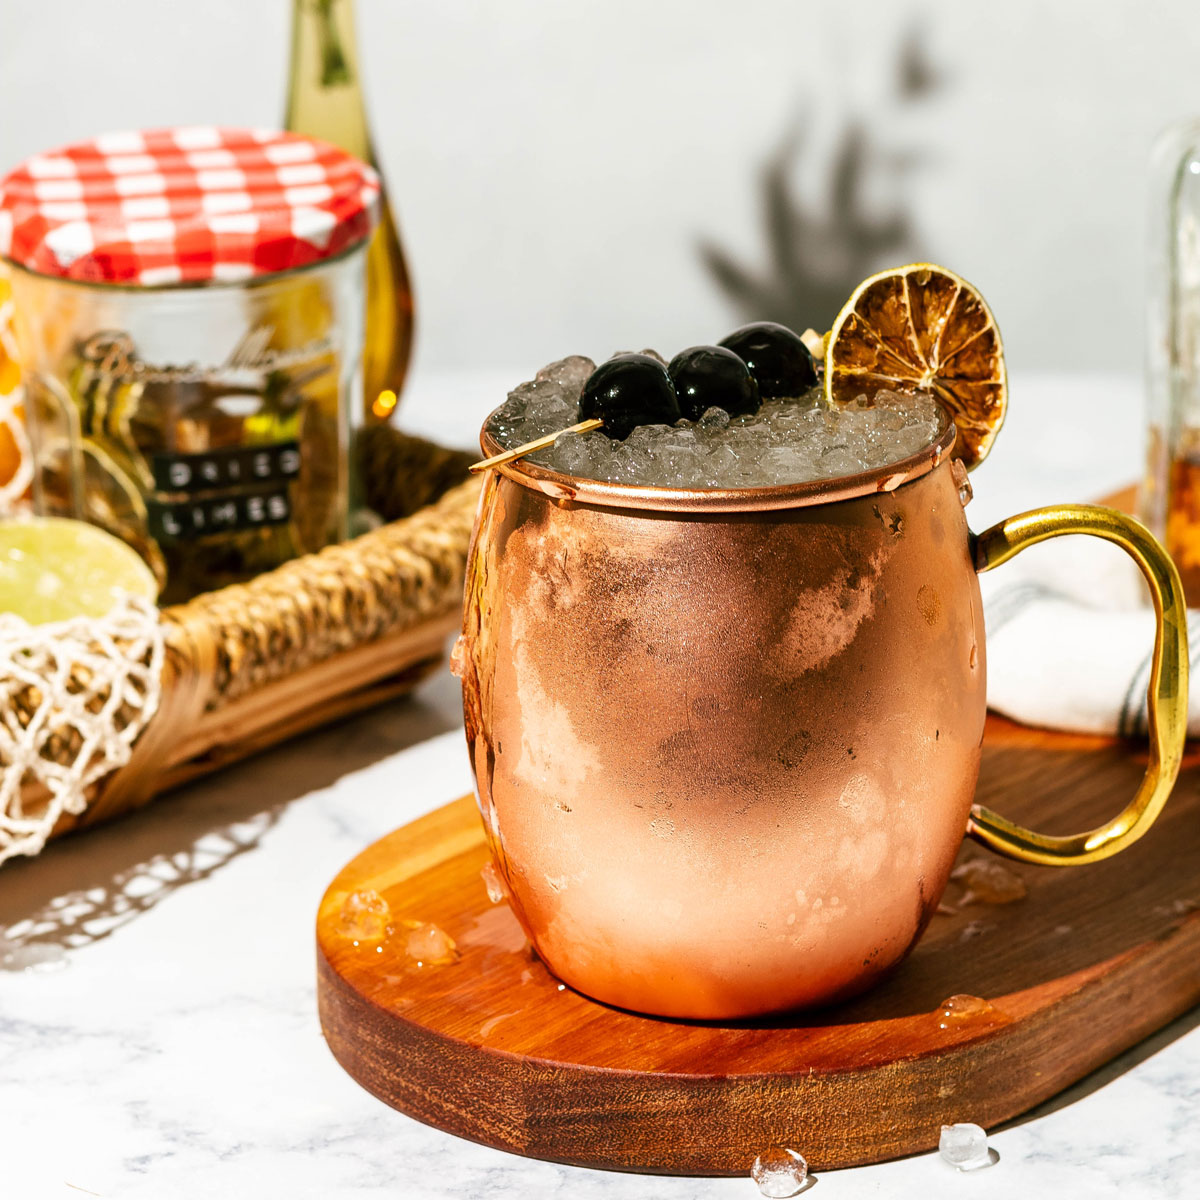 Italian mule in a copper mug with ice spilling out onto a wood board and marble counter.